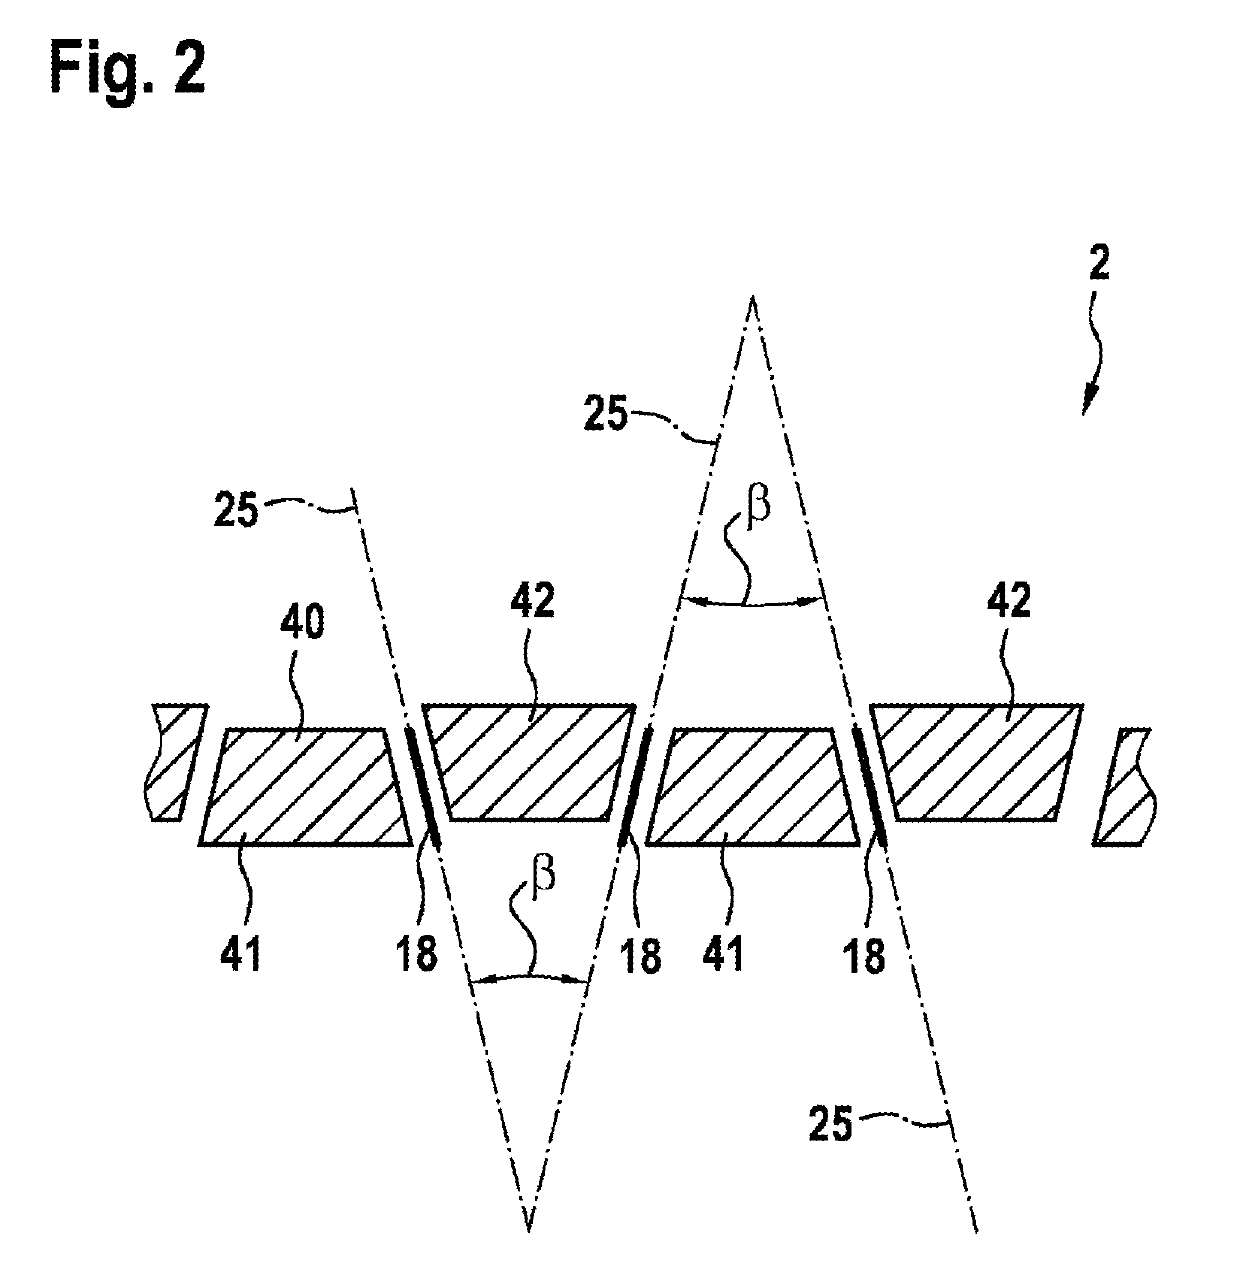 Fin ray-type wiper comprising a flexible structure optimized for demolding